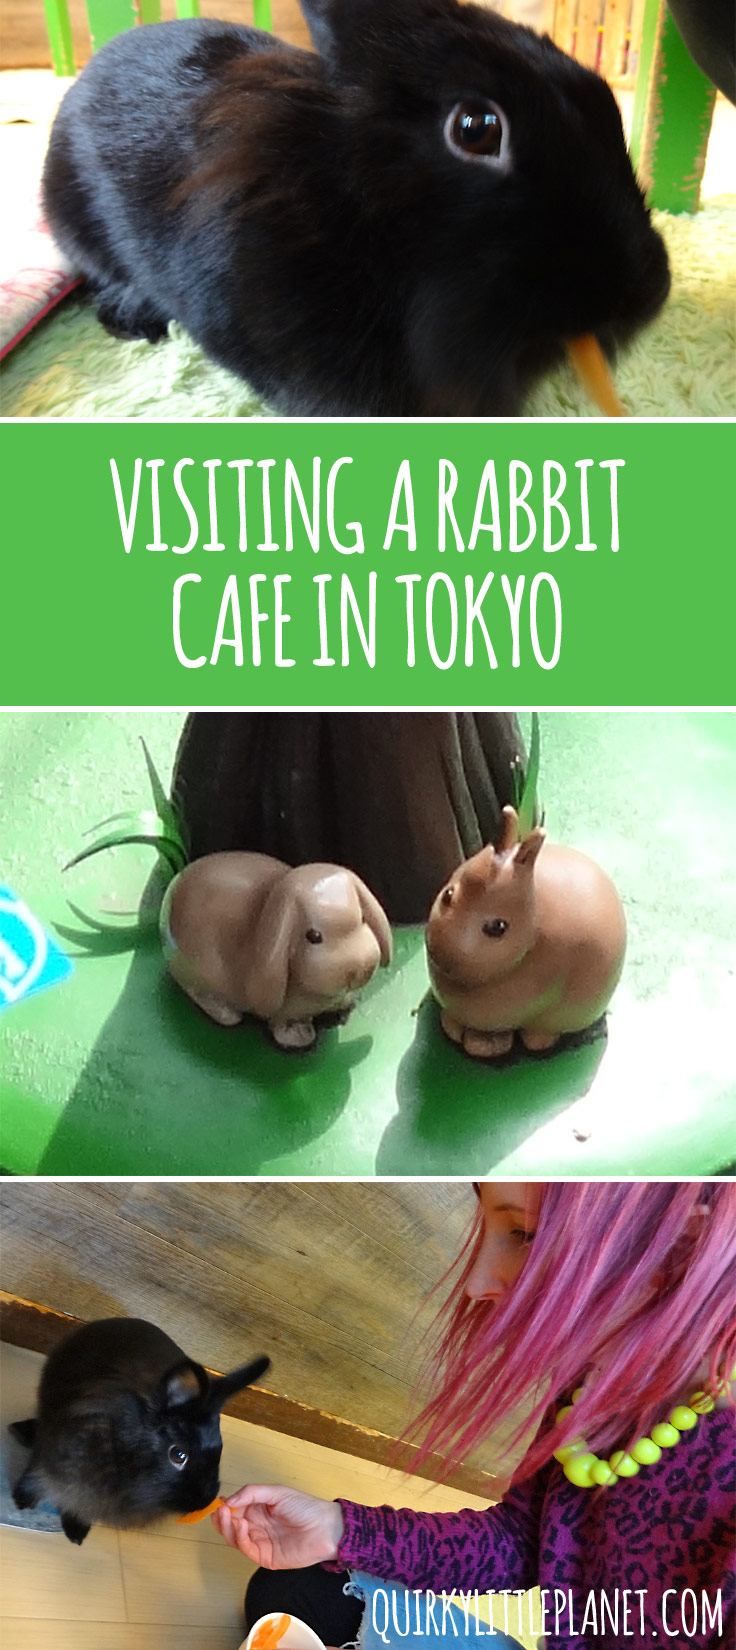 Visiting a rabbit cafe in Tokyo